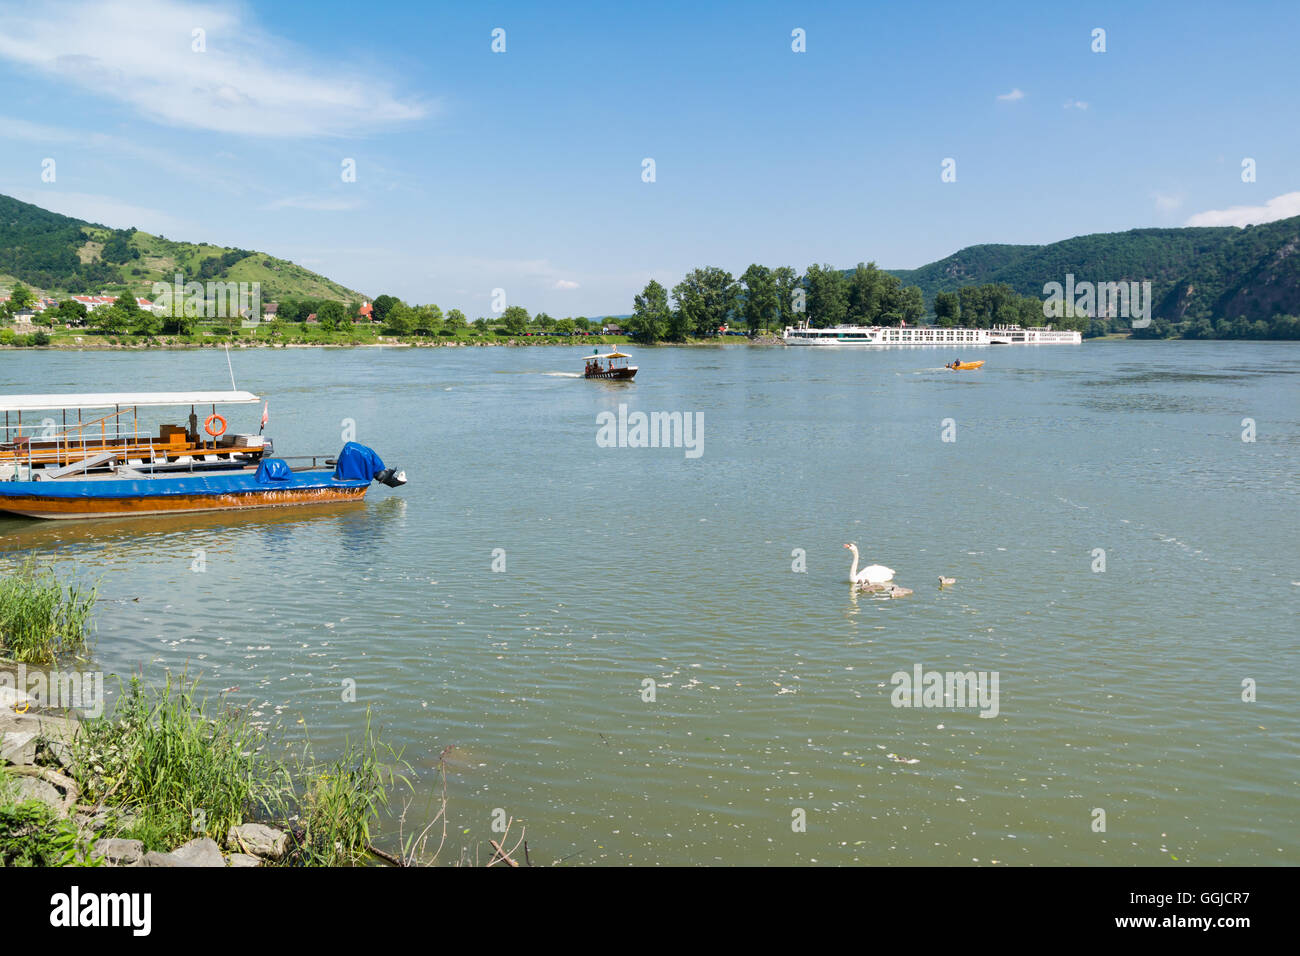 Swans and boats on Danube river in Durnstein, Wachau valley, Lower Austria Stock Photo